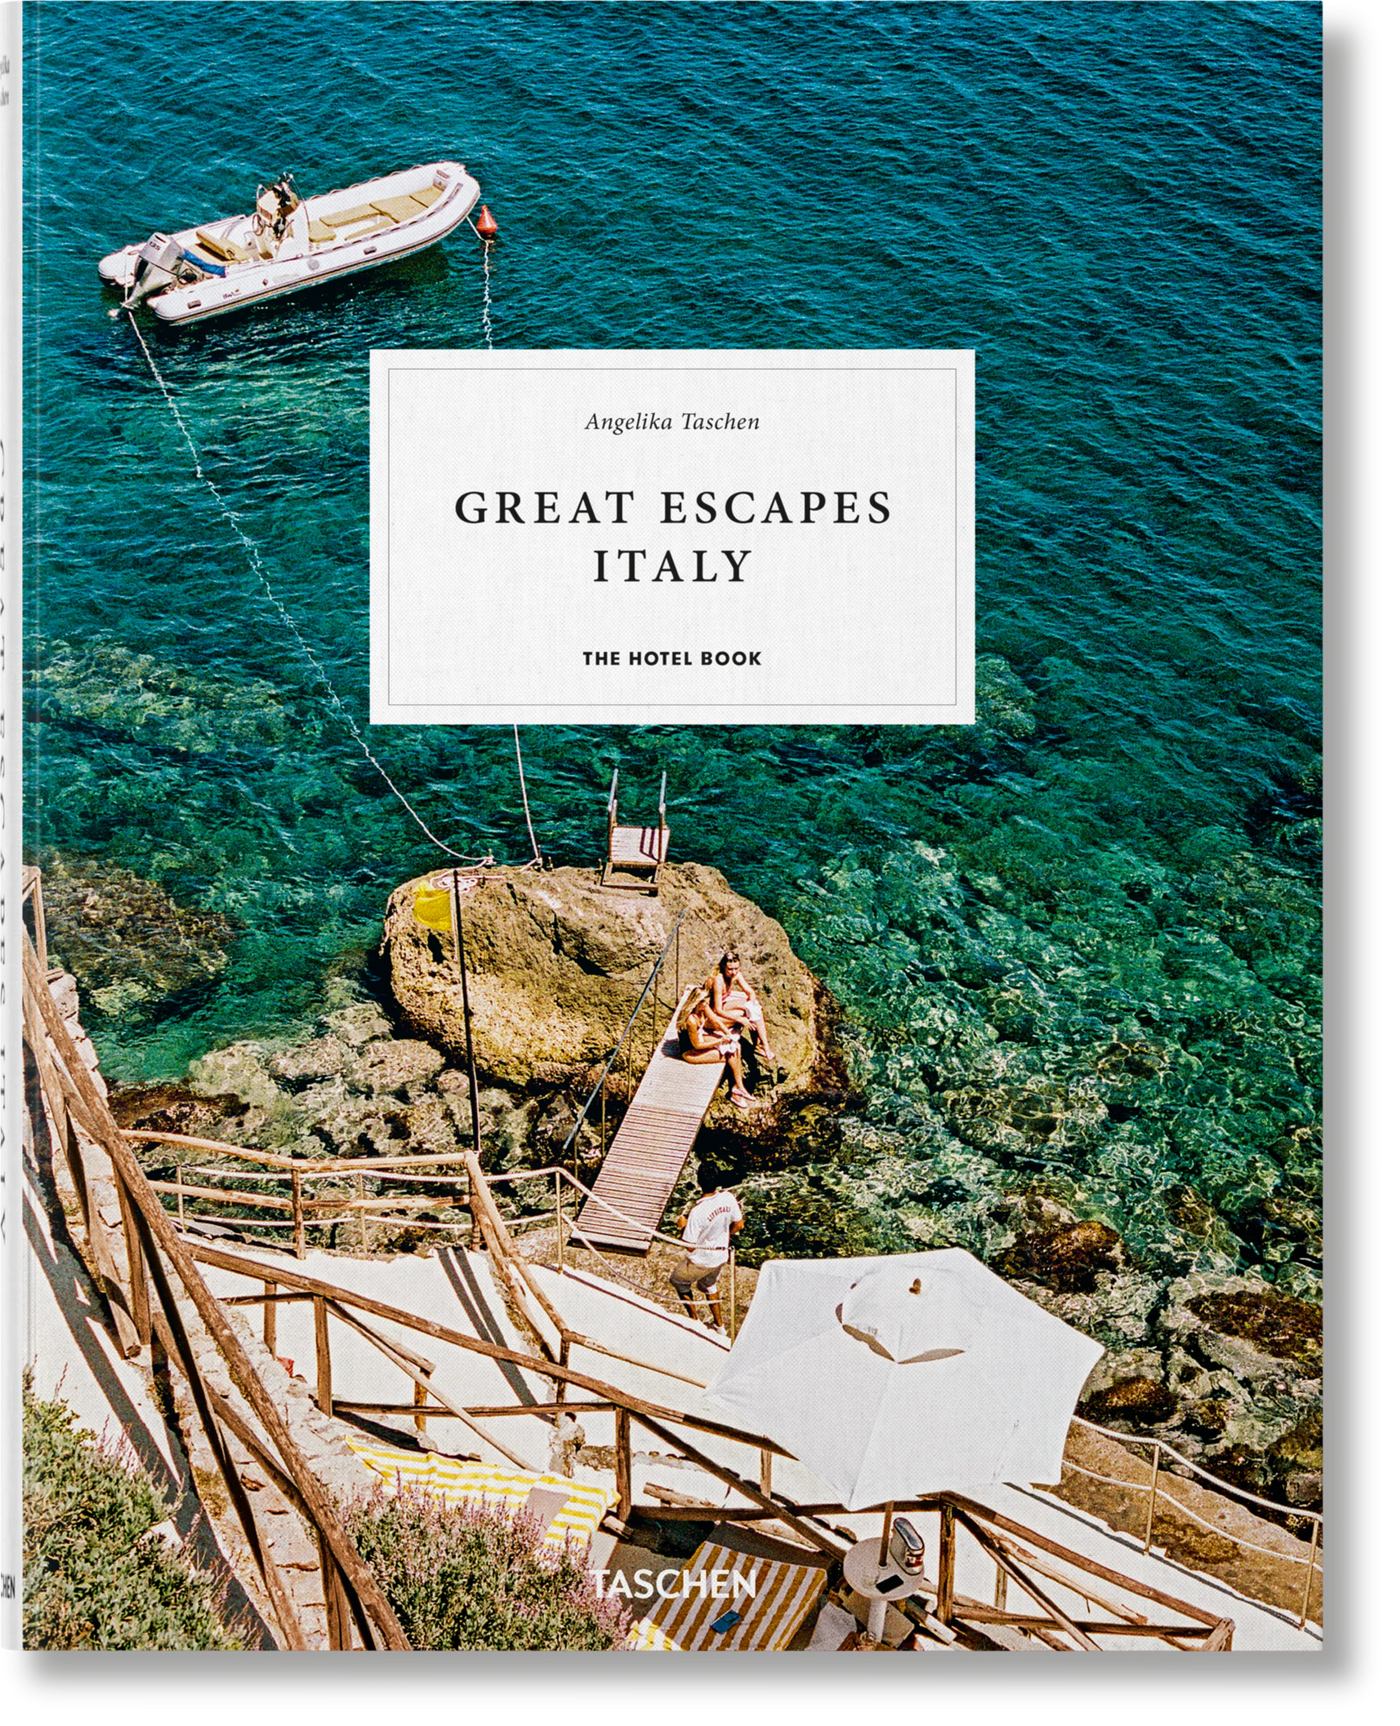 The Great Escape Italy. The Hotel Book